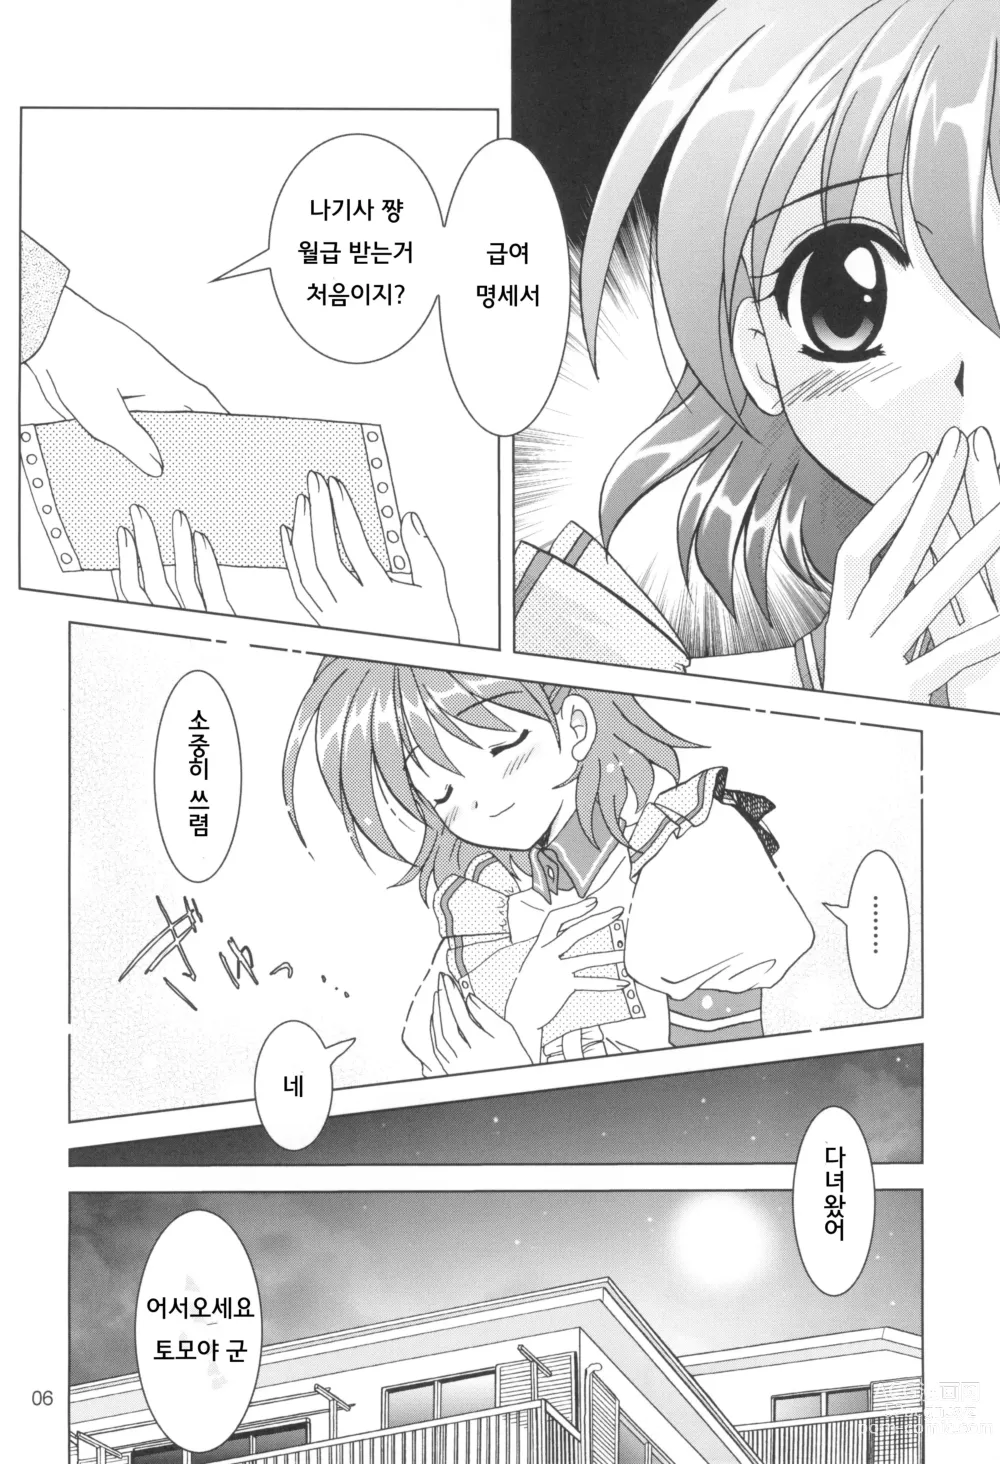 Page 5 of doujinshi 카노니즘 17